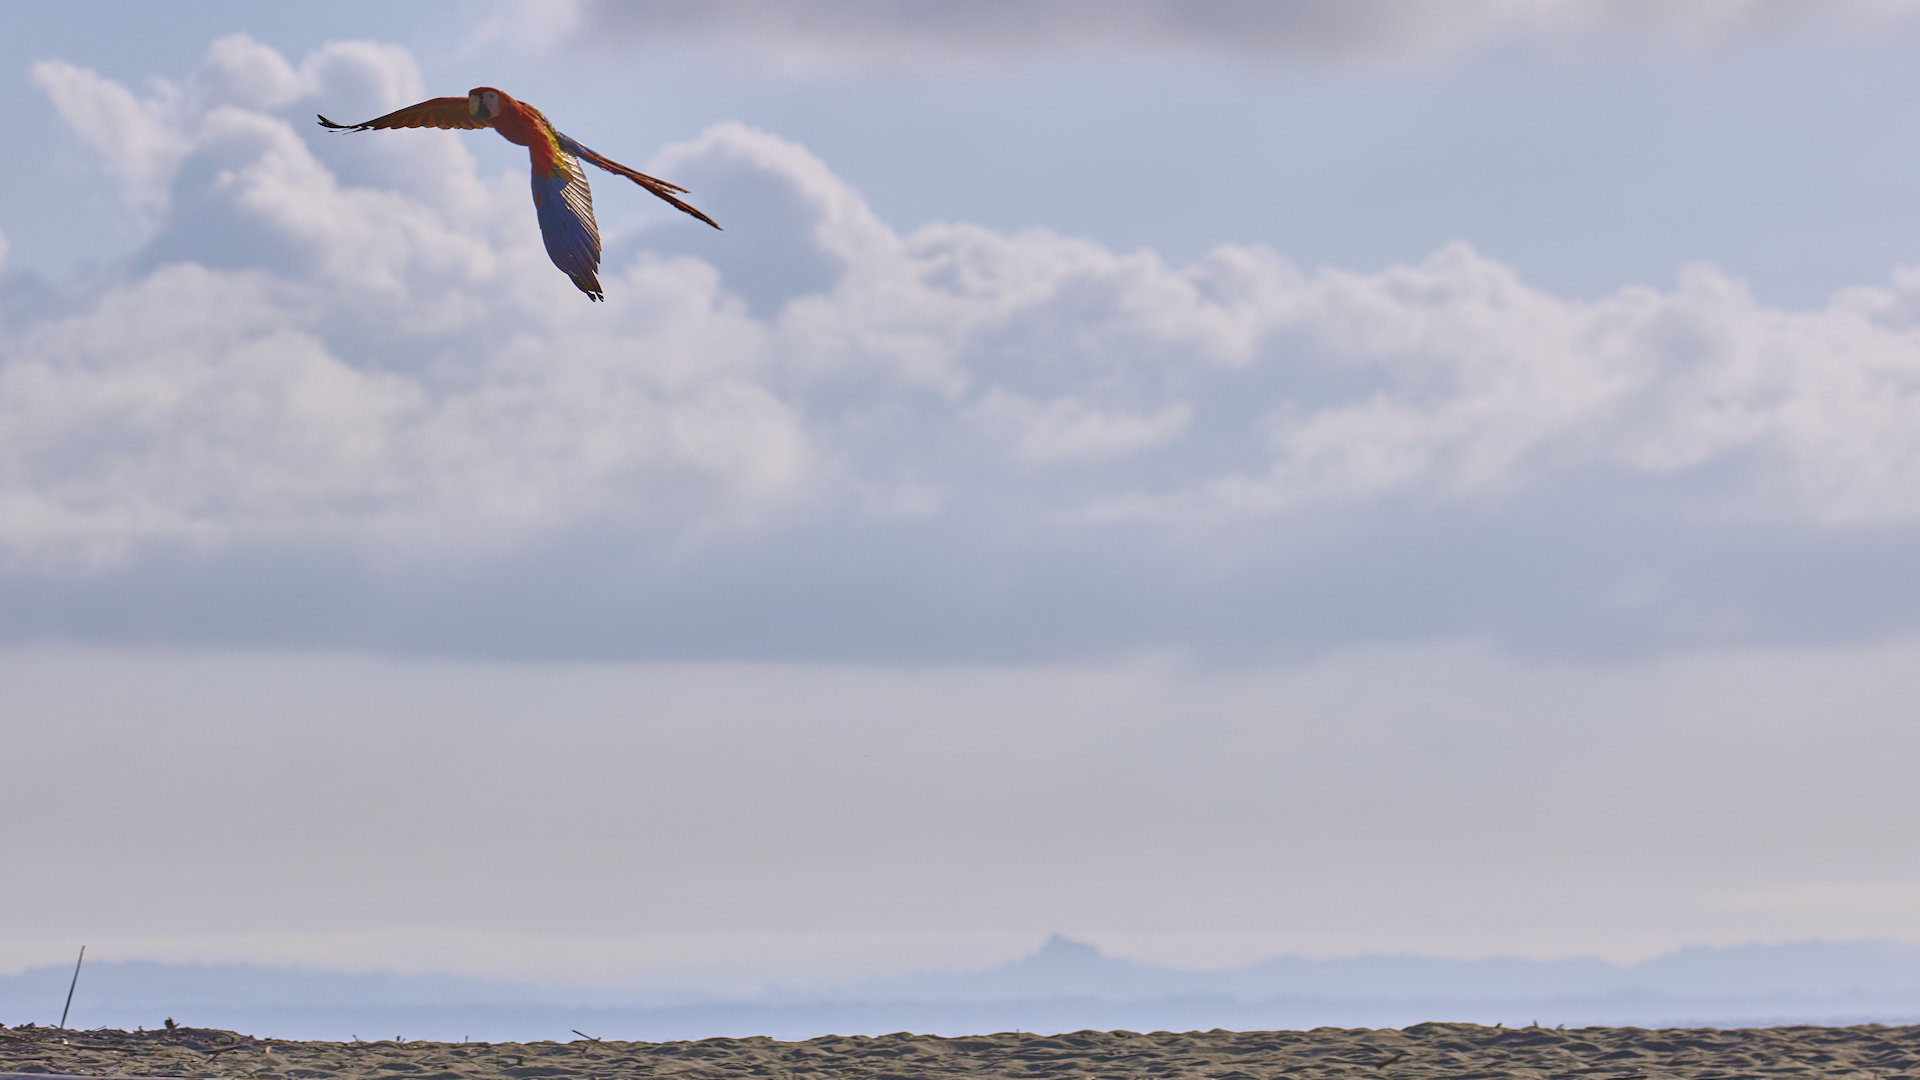 Scarlet macaw flying over beach - image 6